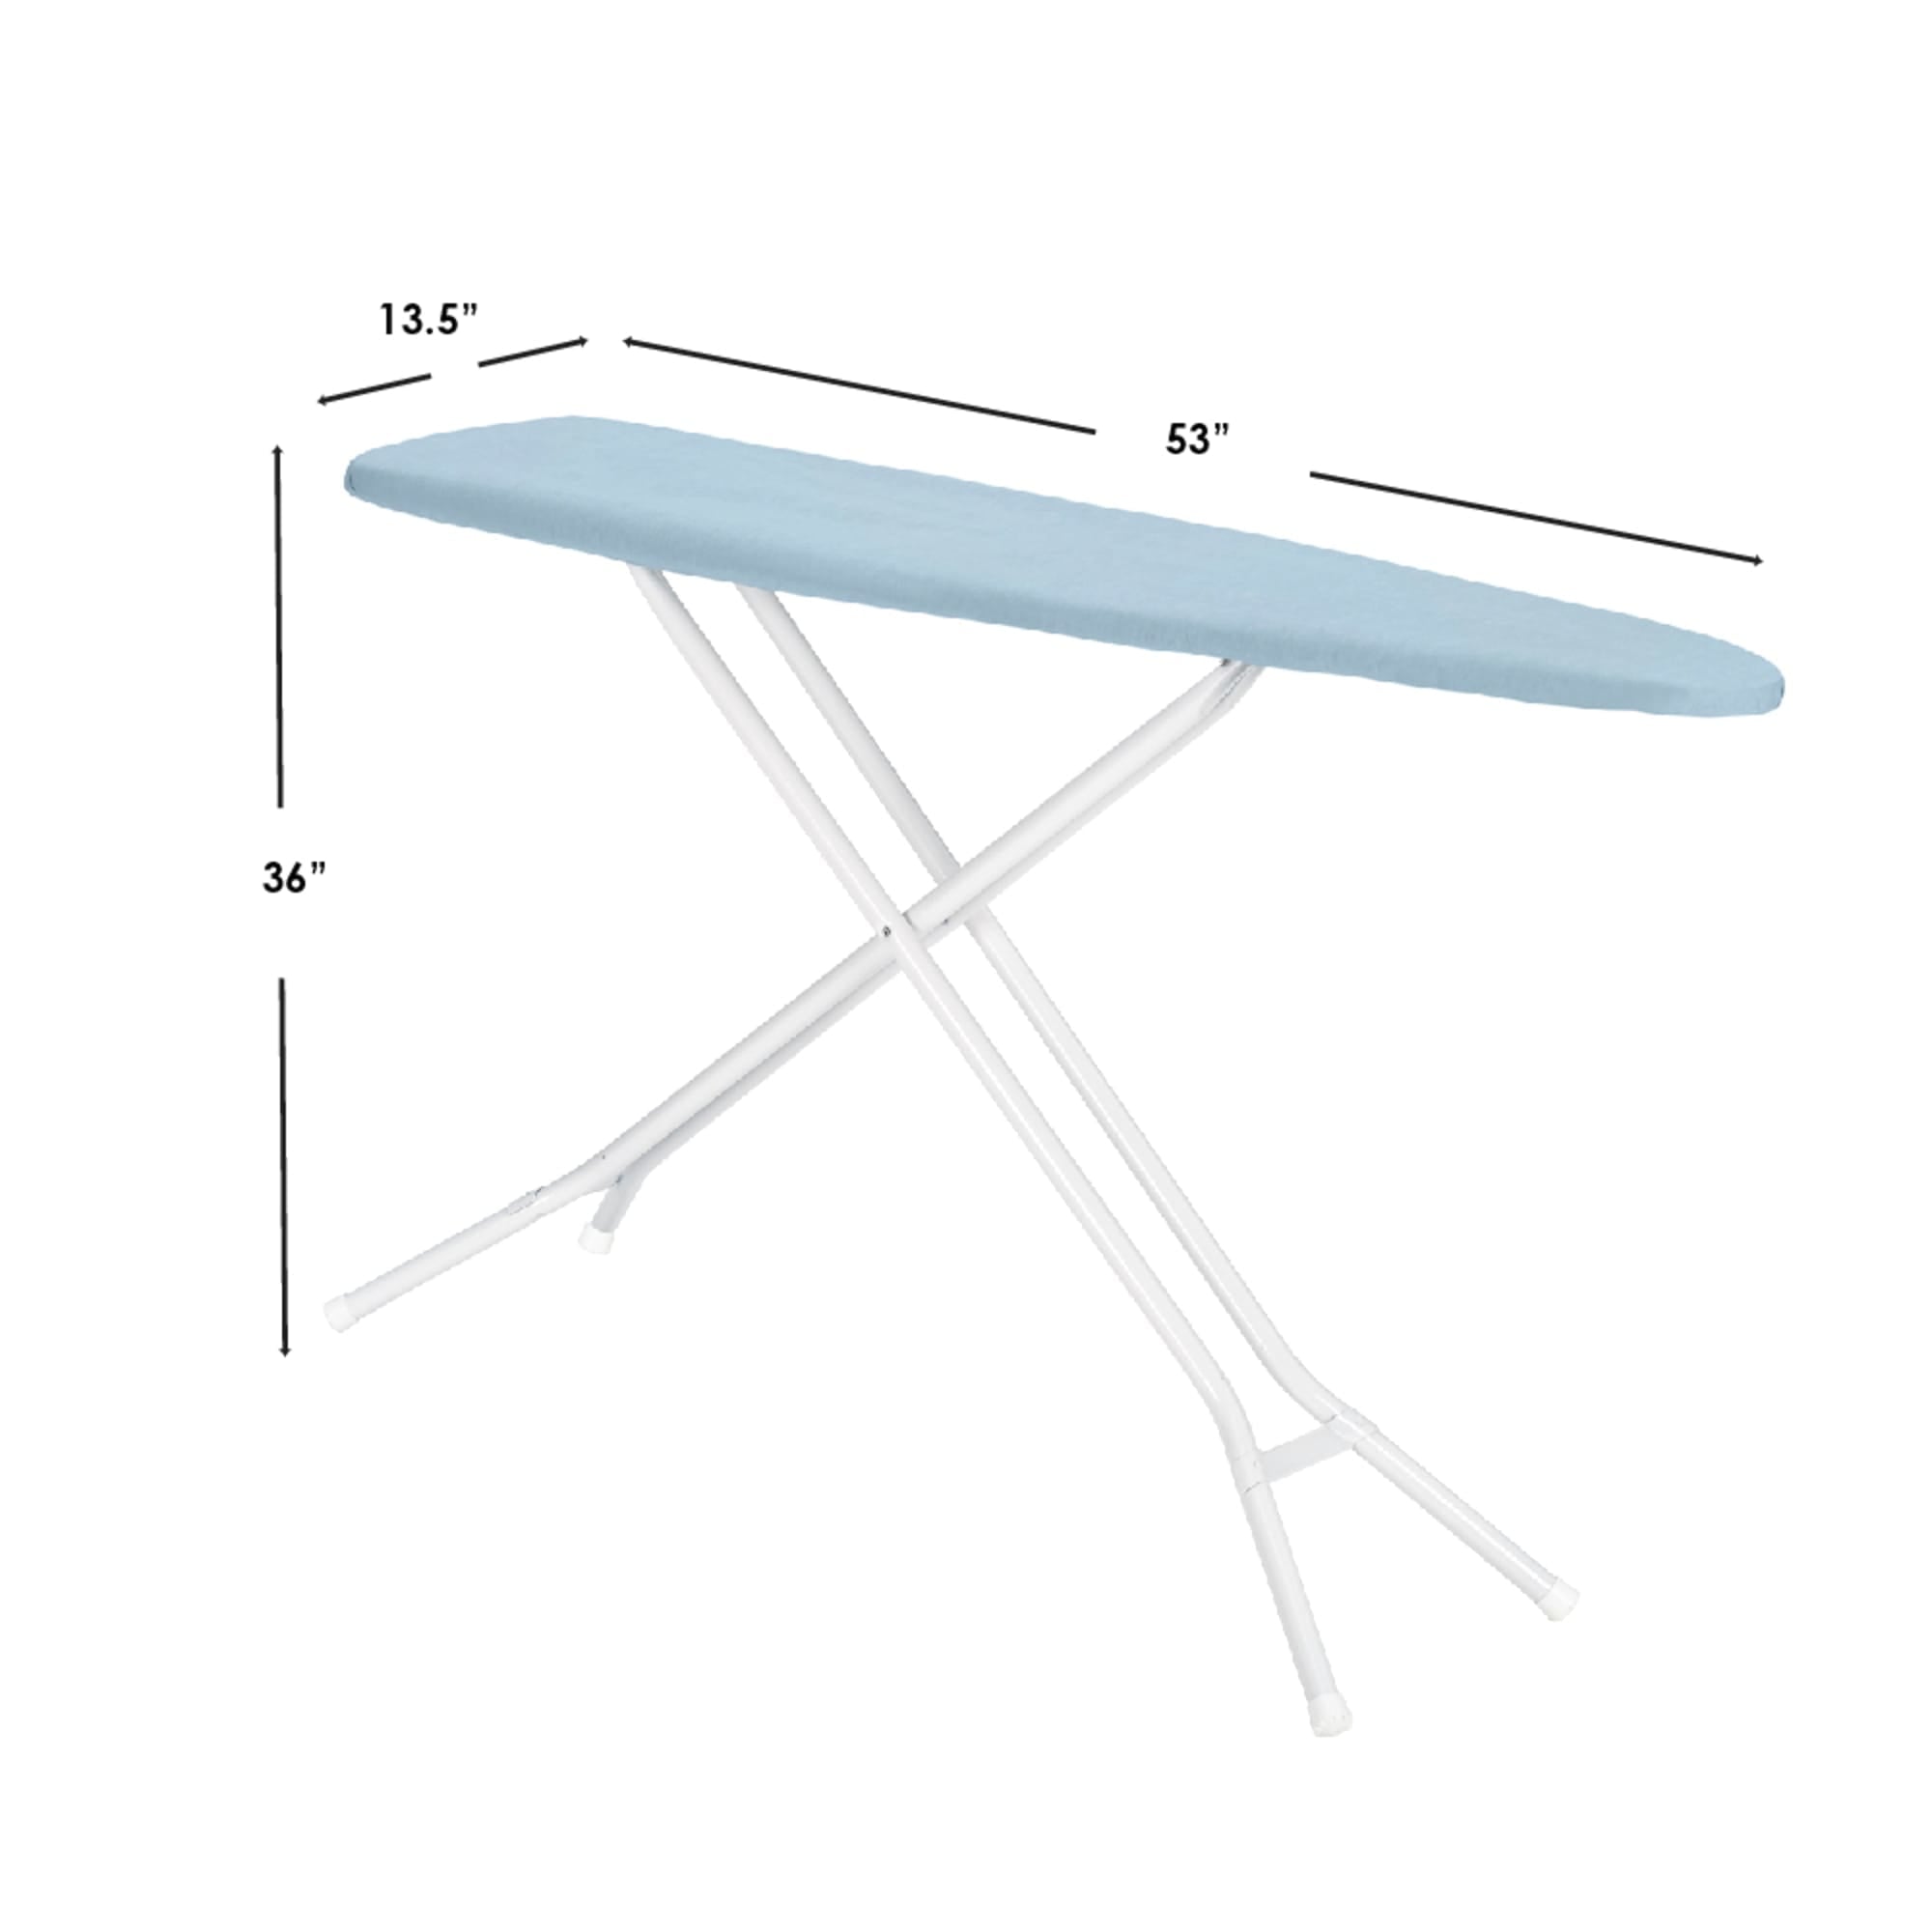 Seymour Home Products Adjustable Height, 4-Leg Ironing Board With Perforated Top, Light Blue (4 Pack) $30.00 EACH, CASE PACK OF 4